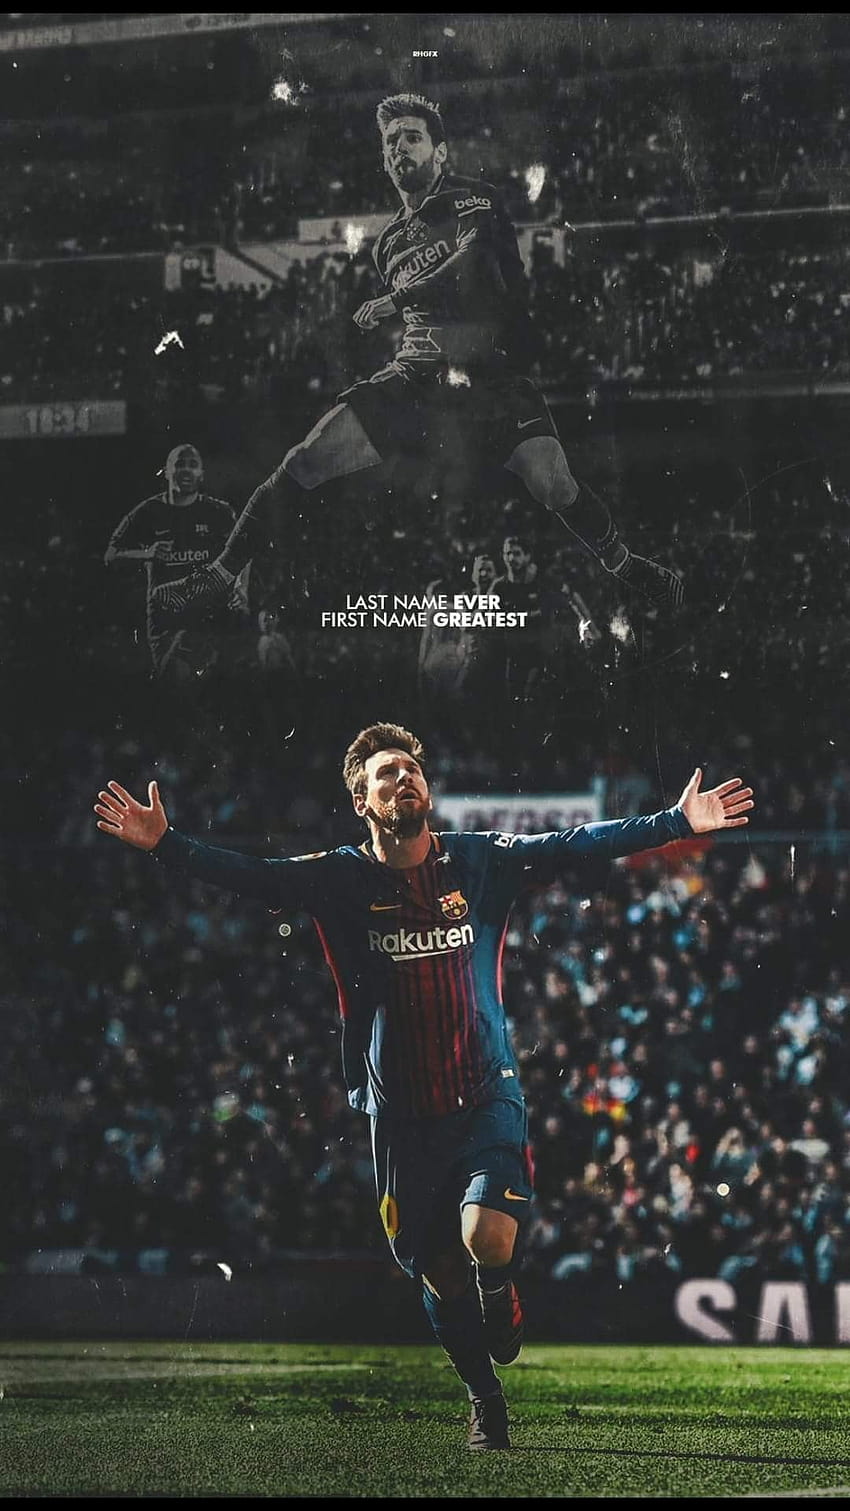 Wallpaper ID: 666815 / Lionel Messi, Argentinian, Soccer, 4K free download